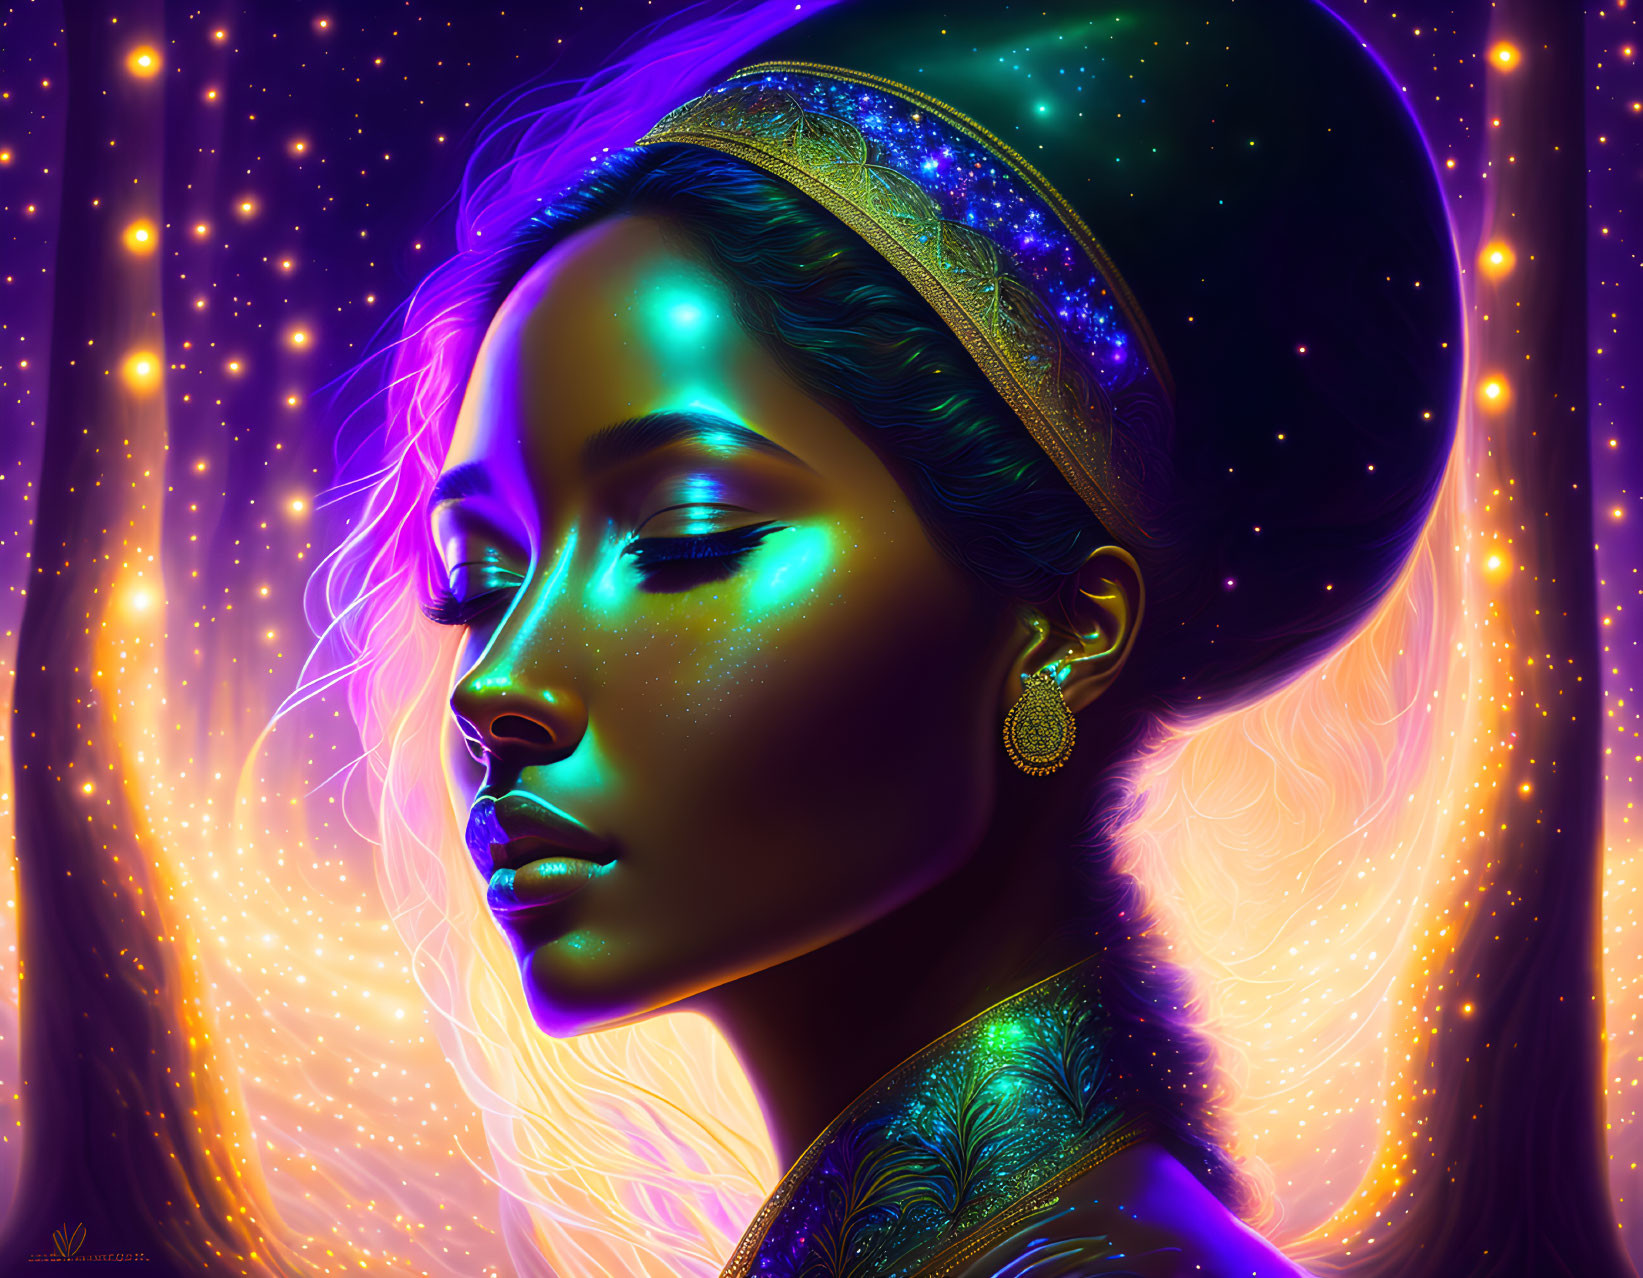 Digital Artwork: Woman with Luminous Purple and Blue Skin, Golden Jewelry, Cosmic Background